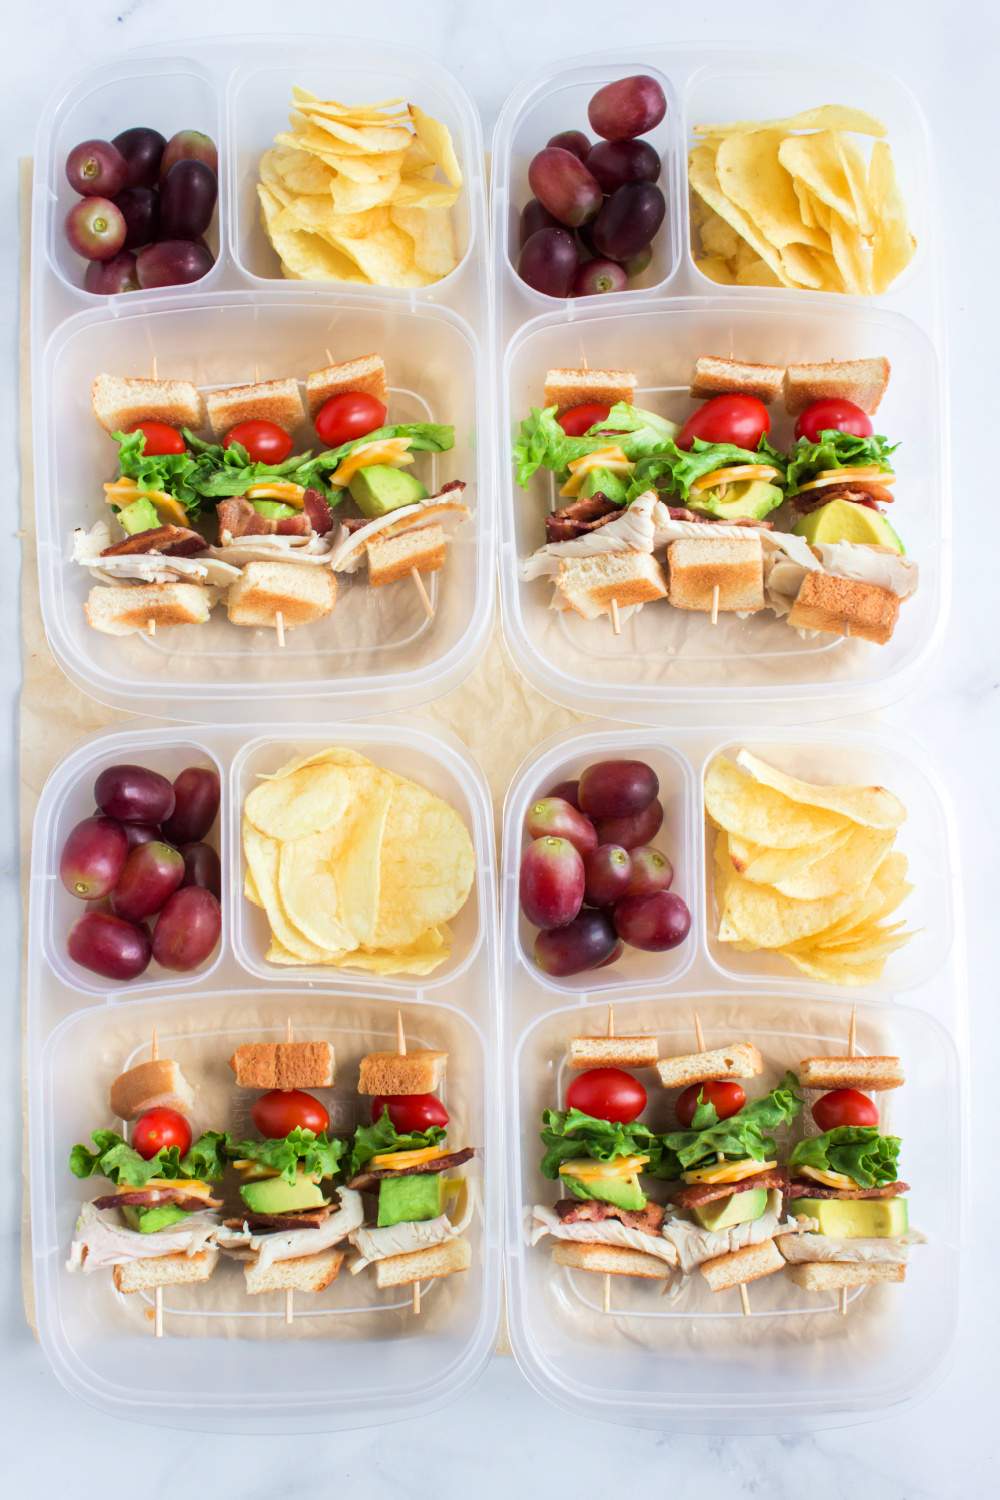 This turkey club skewers lunch box idea has skewers filled with turkey, bacon, lettuce, cheese, and tomato, tucked between pieces of bread. via @familyfresh